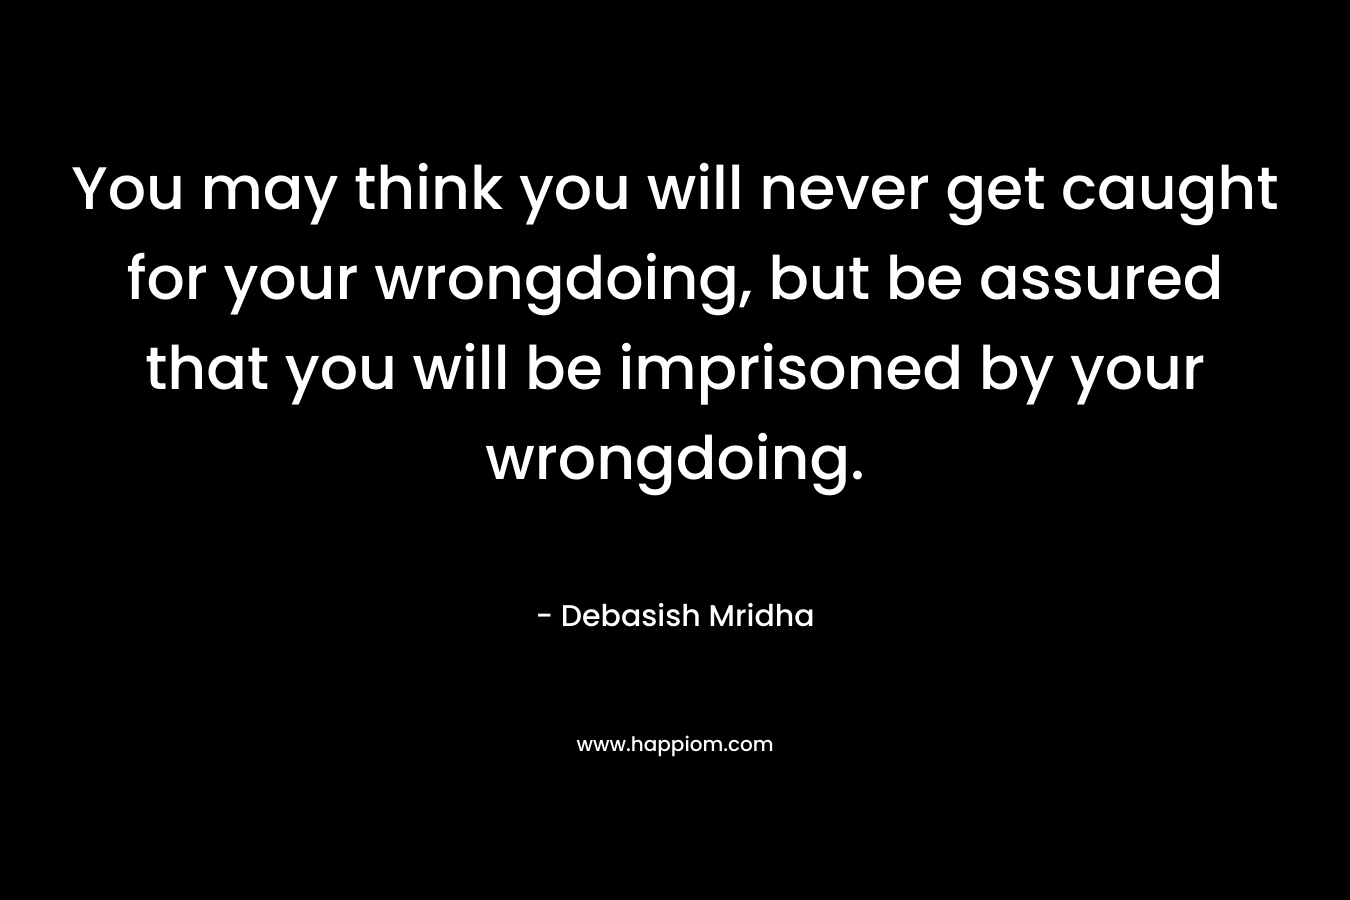 You may think you will never get caught for your wrongdoing, but be assured that you will be imprisoned by your wrongdoing. – Debasish Mridha